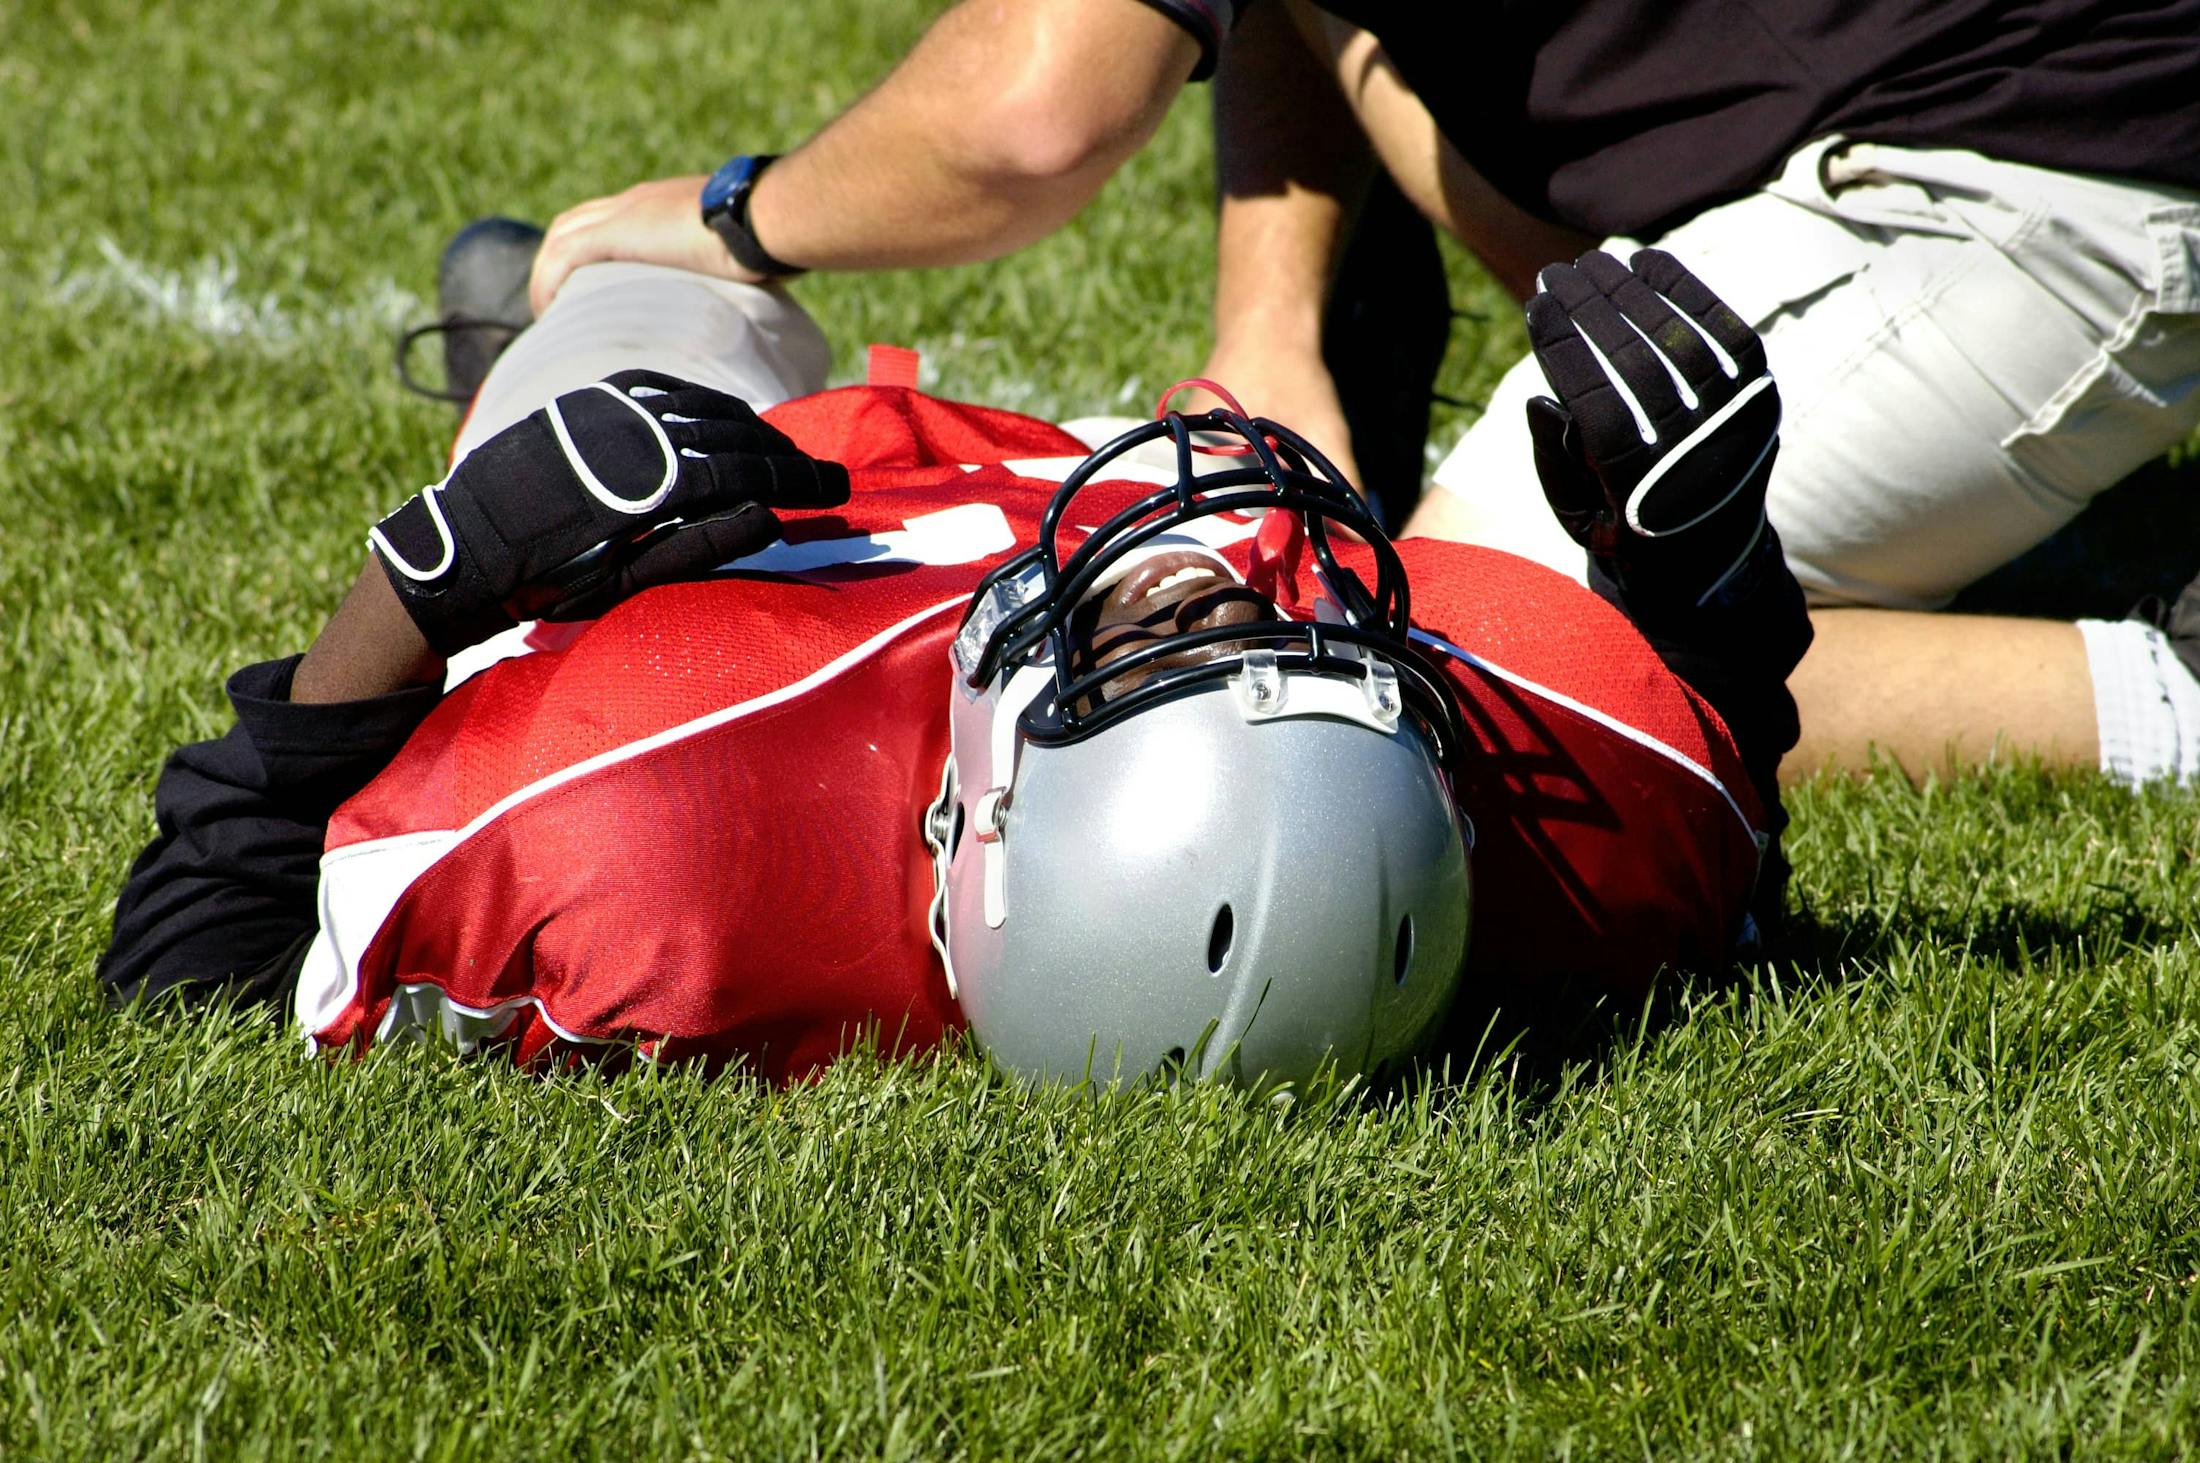 Football player injured on the field